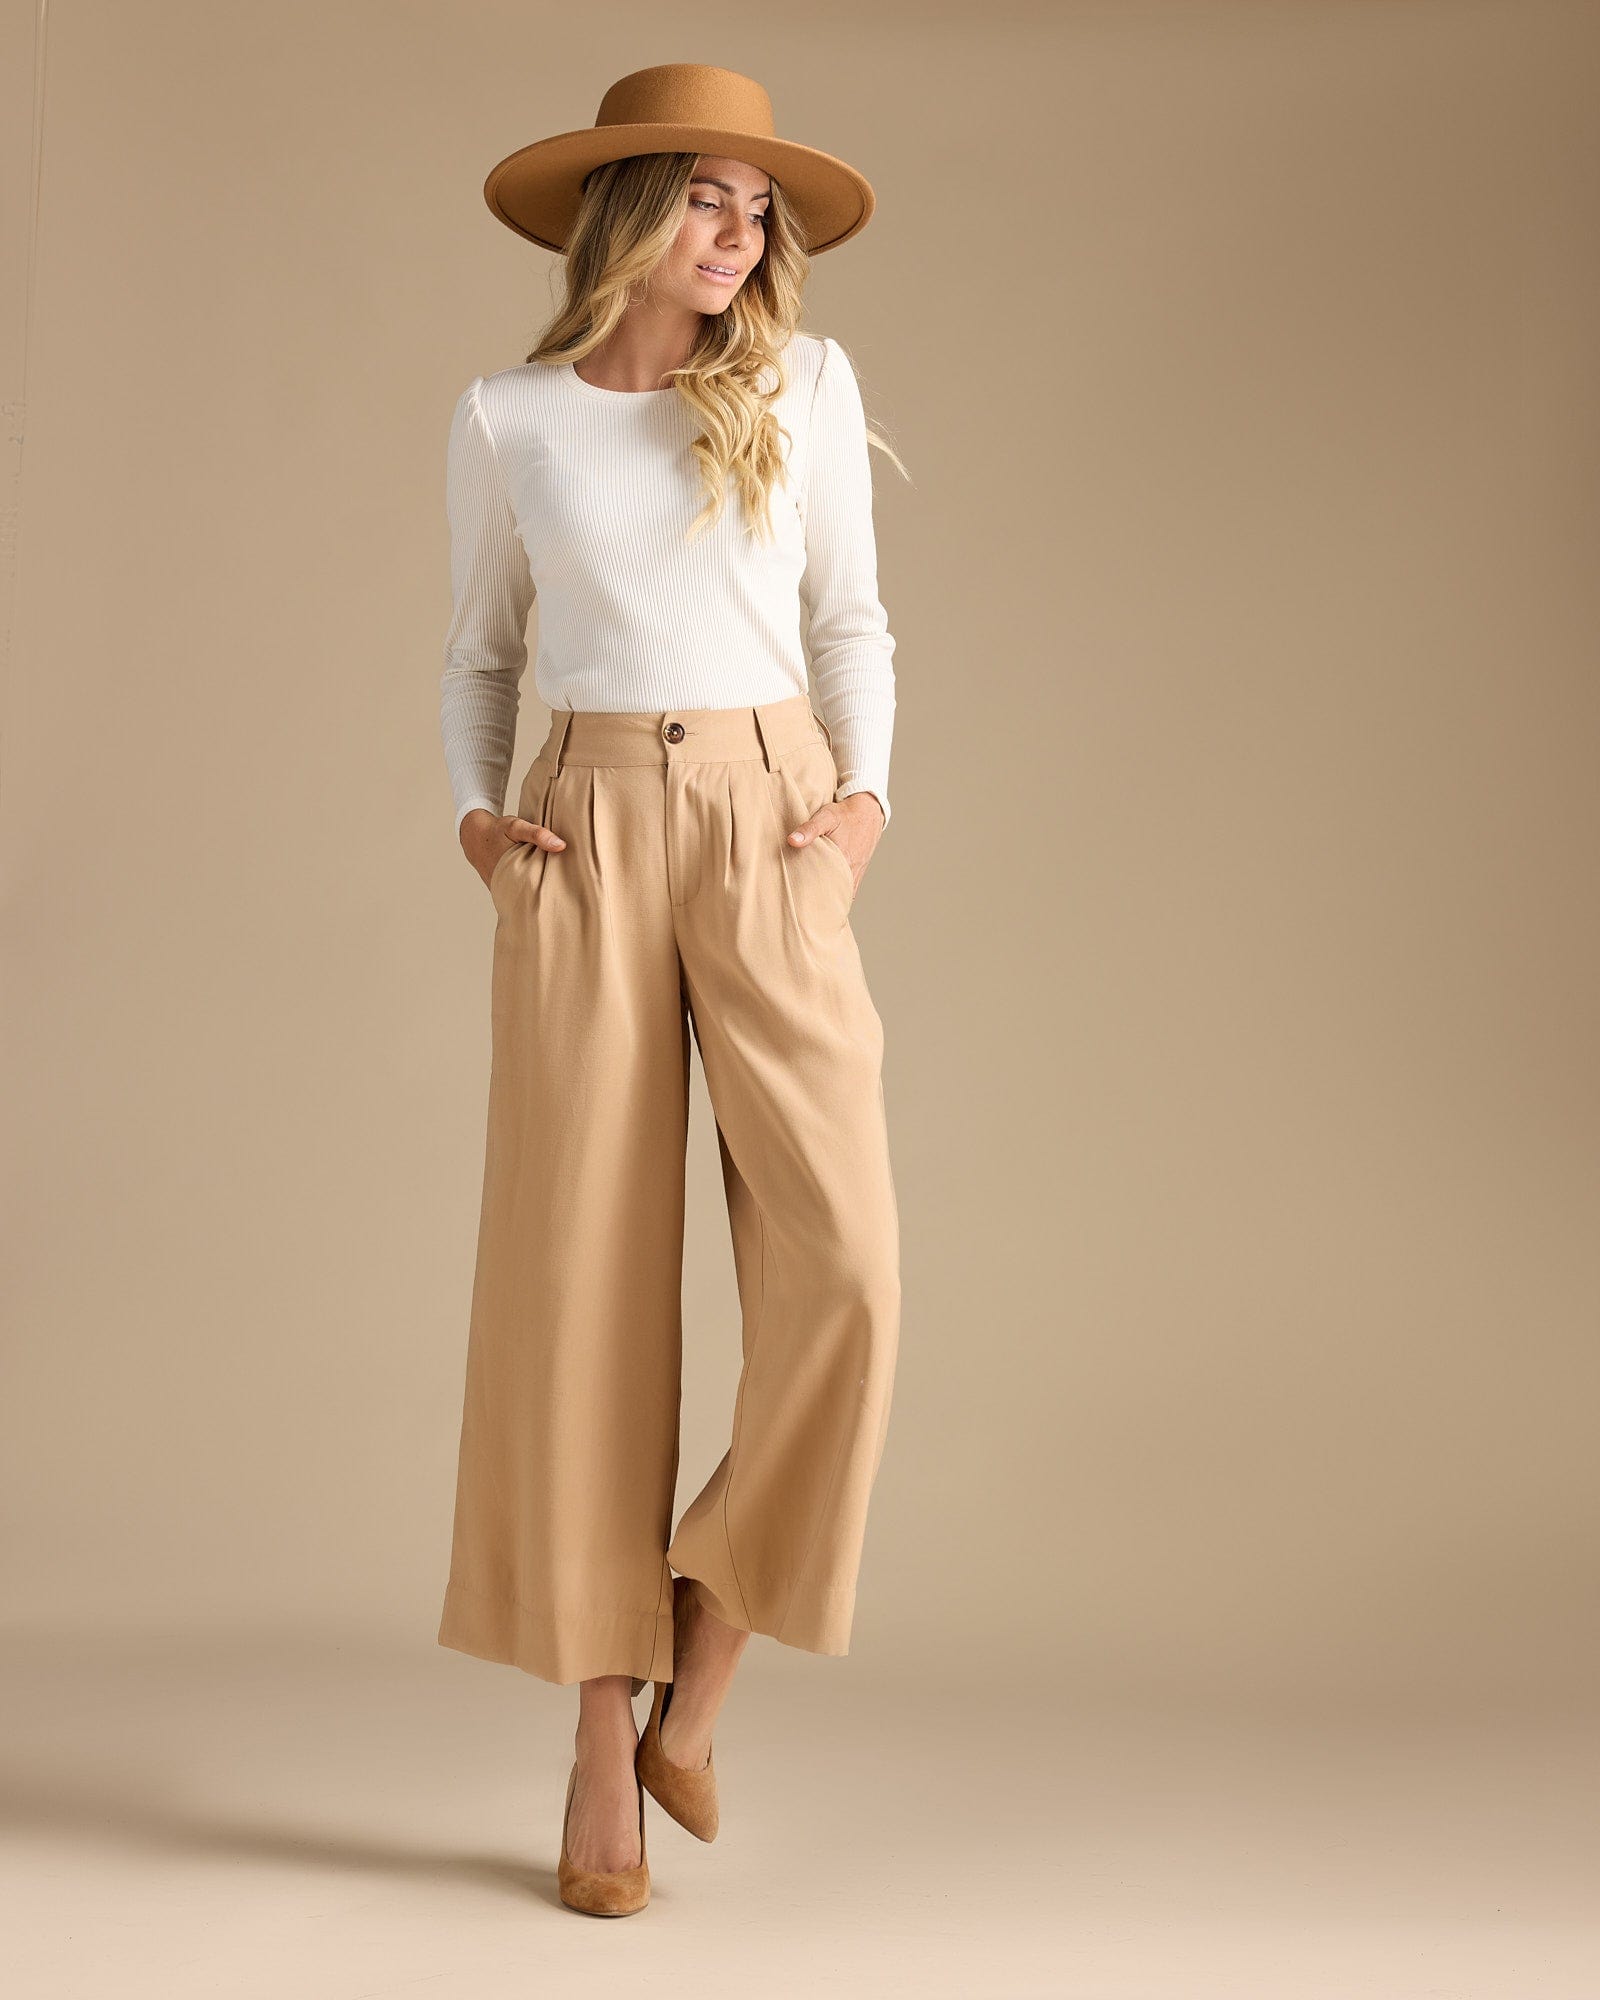 Reduce Price RYRJJ Wide Leg Pants for Women Work Business Casual High  Waisted Dress Pants Comfy Flowy Trousers Office(Beige,L) - Walmart.com